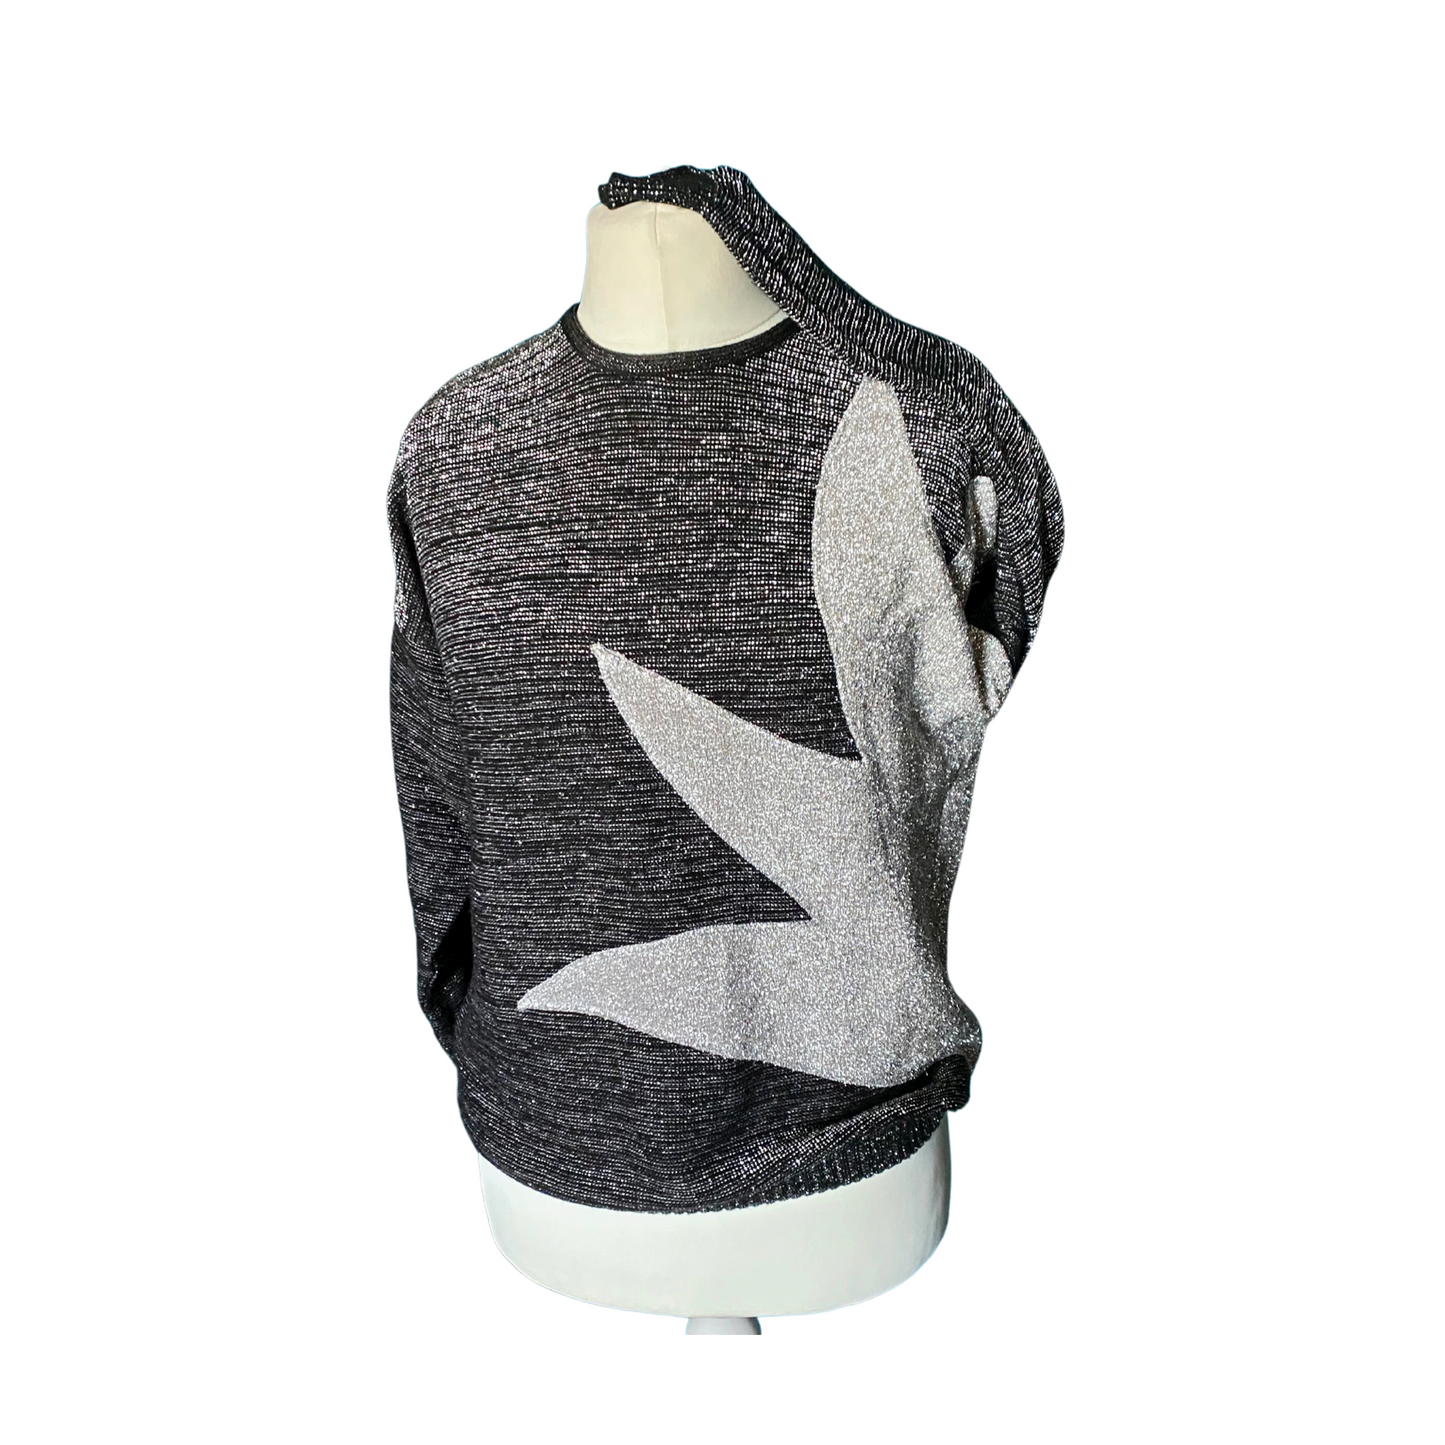 80s black and silver star graphic print sweater. Approx UK size 14-18.